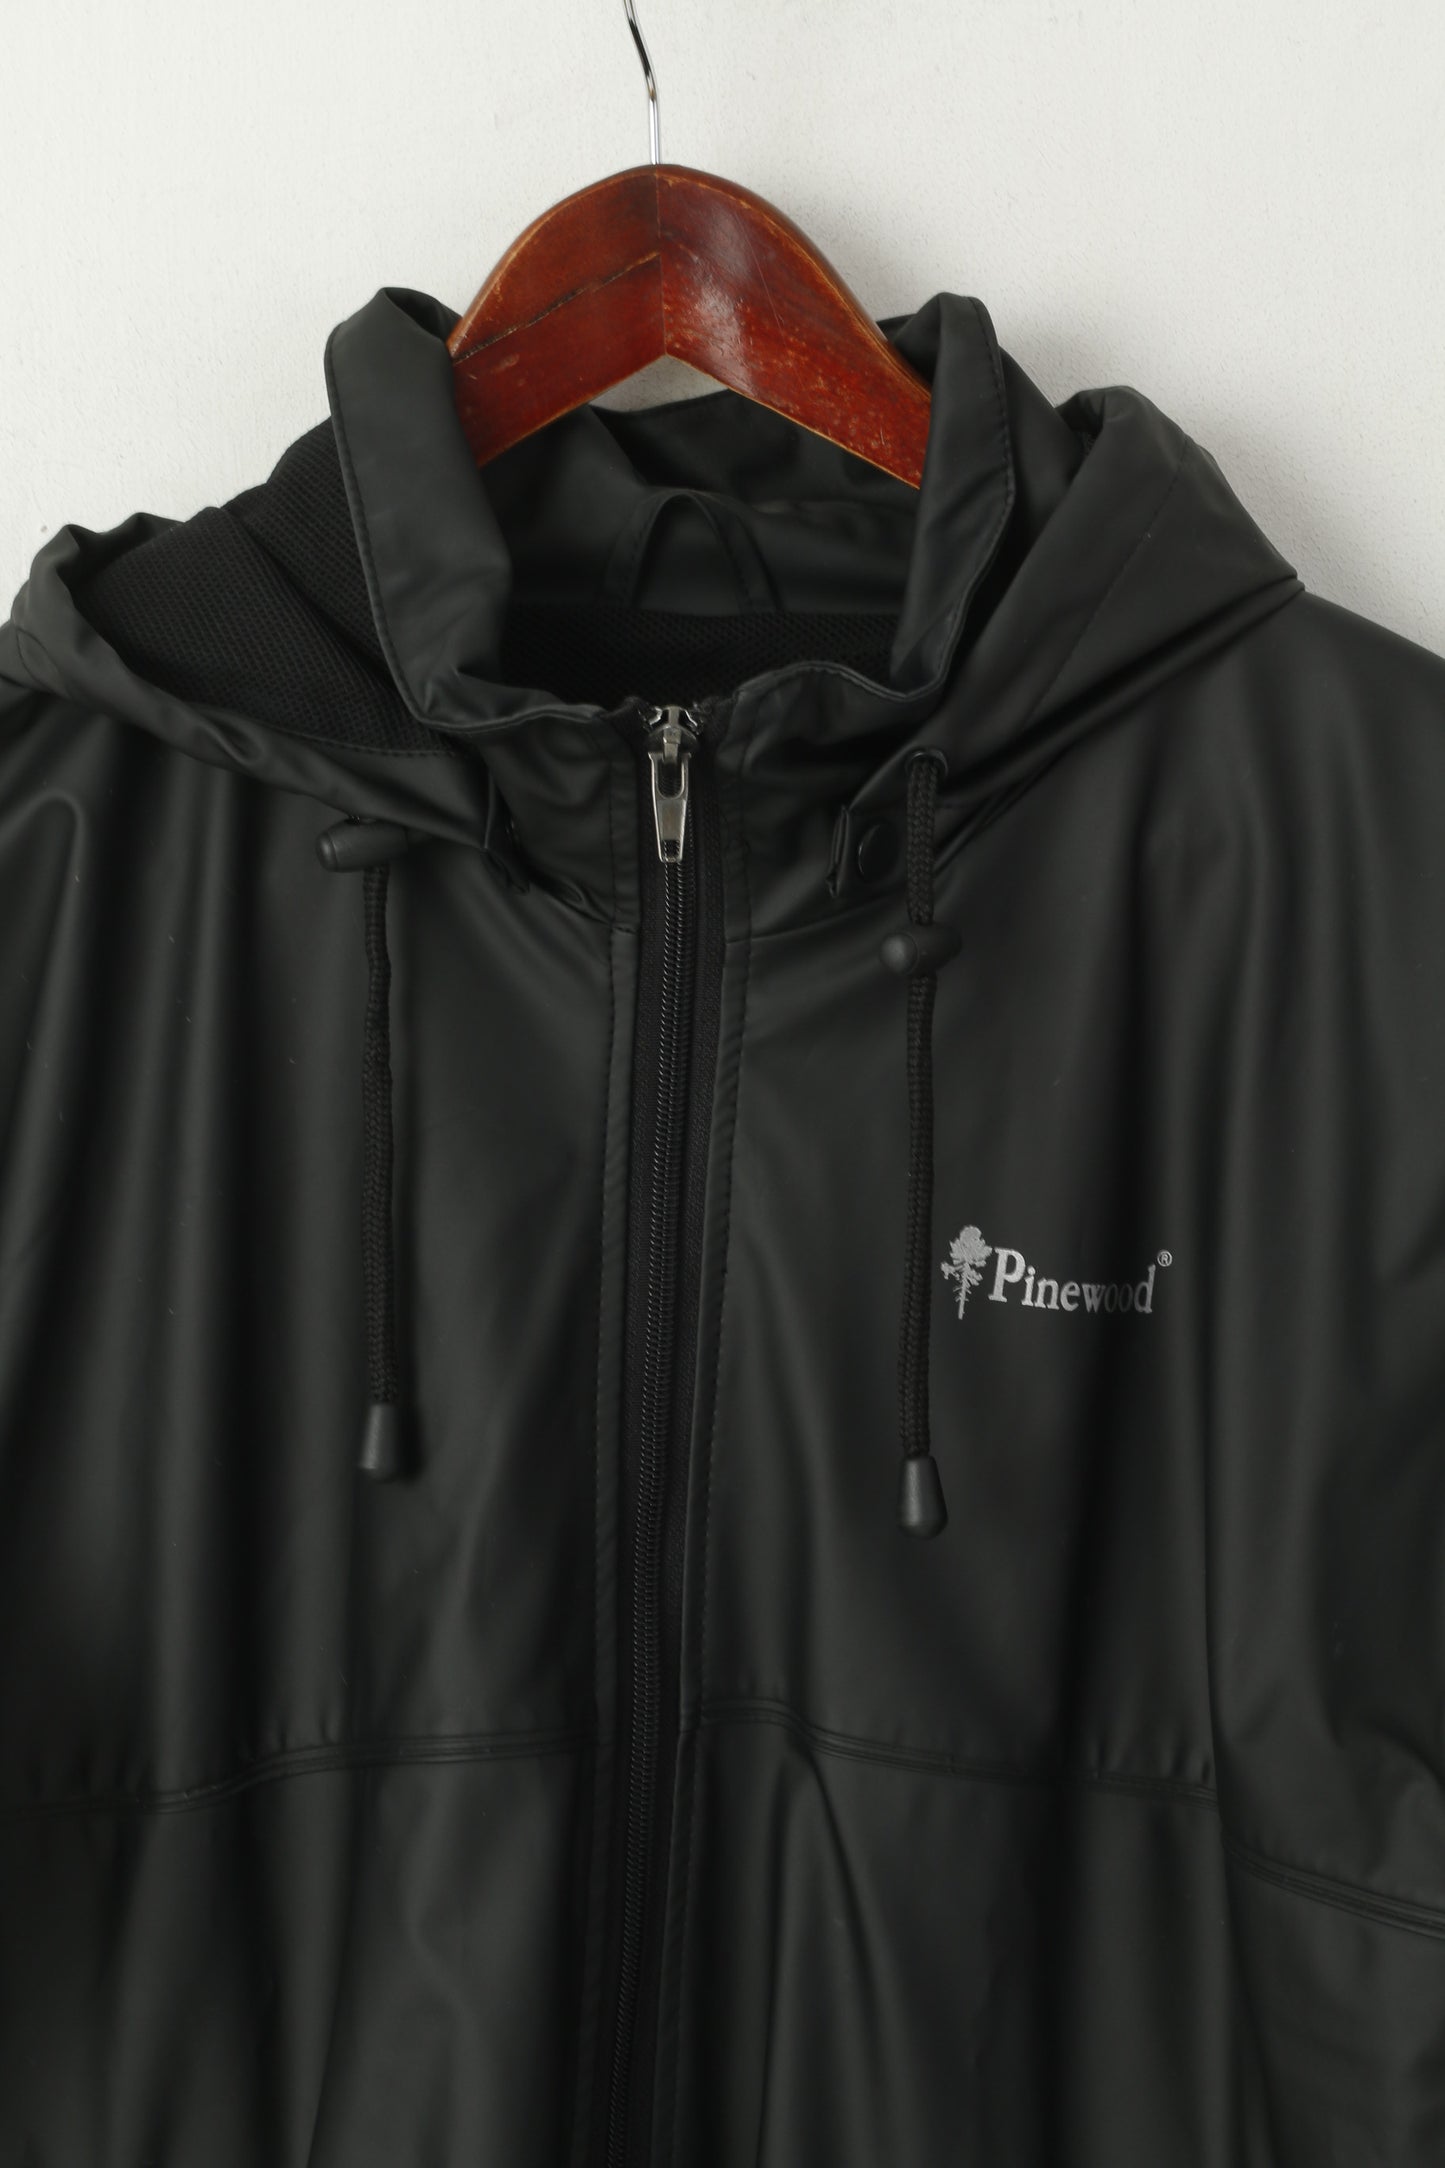 Pinewood Men 176 XS Jacket Black Outdoor Removable Hood Mesh Lined Mountain Top